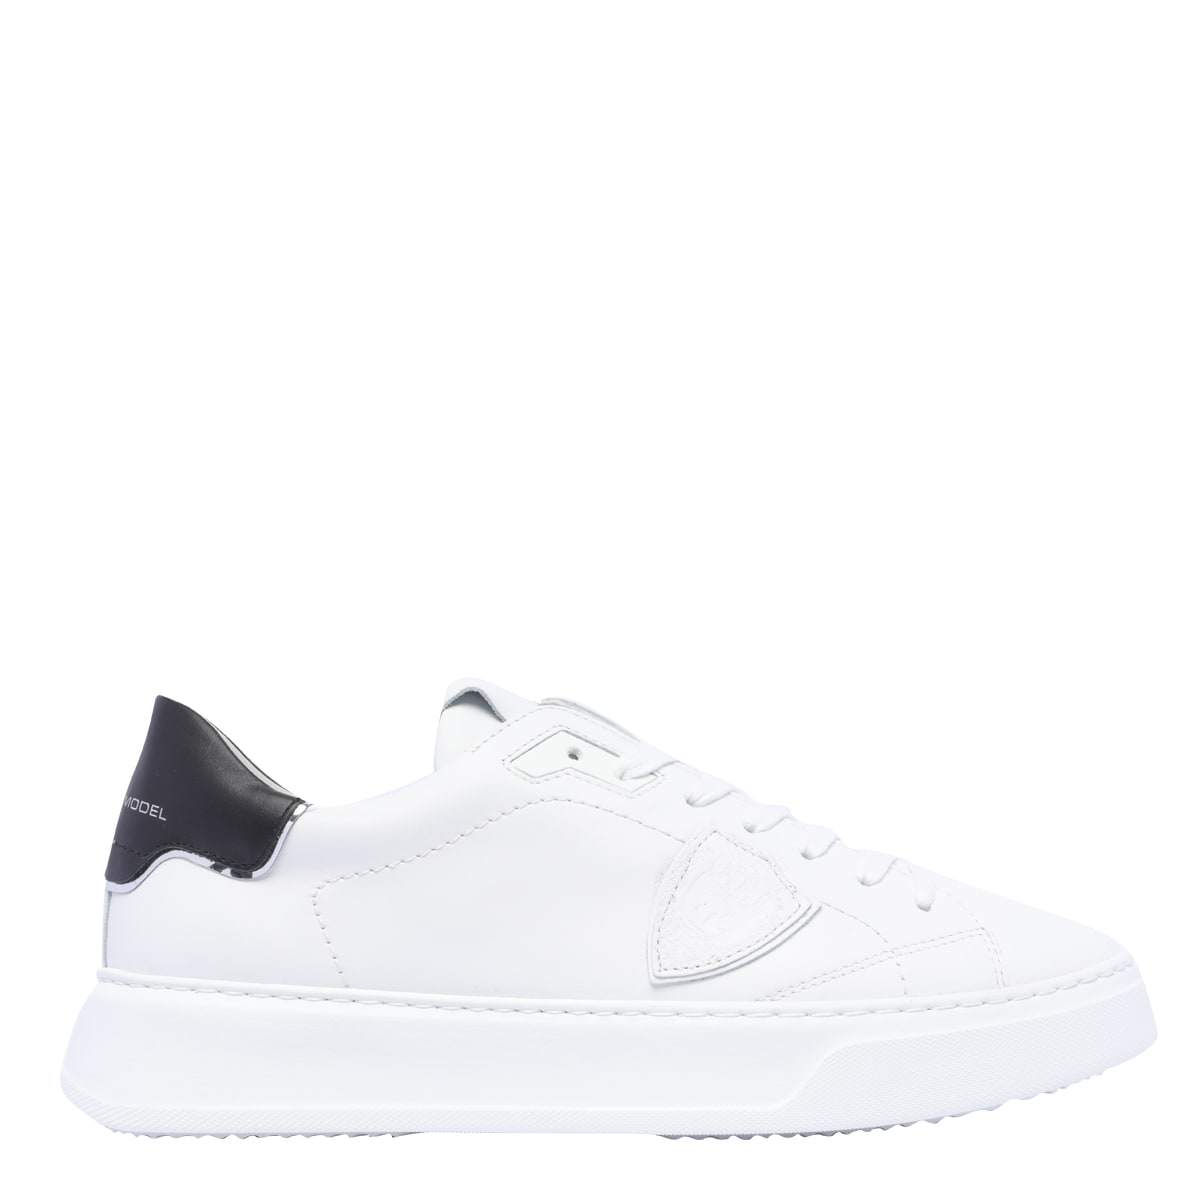 Shop Philippe Model Temple Sneakers In White/black